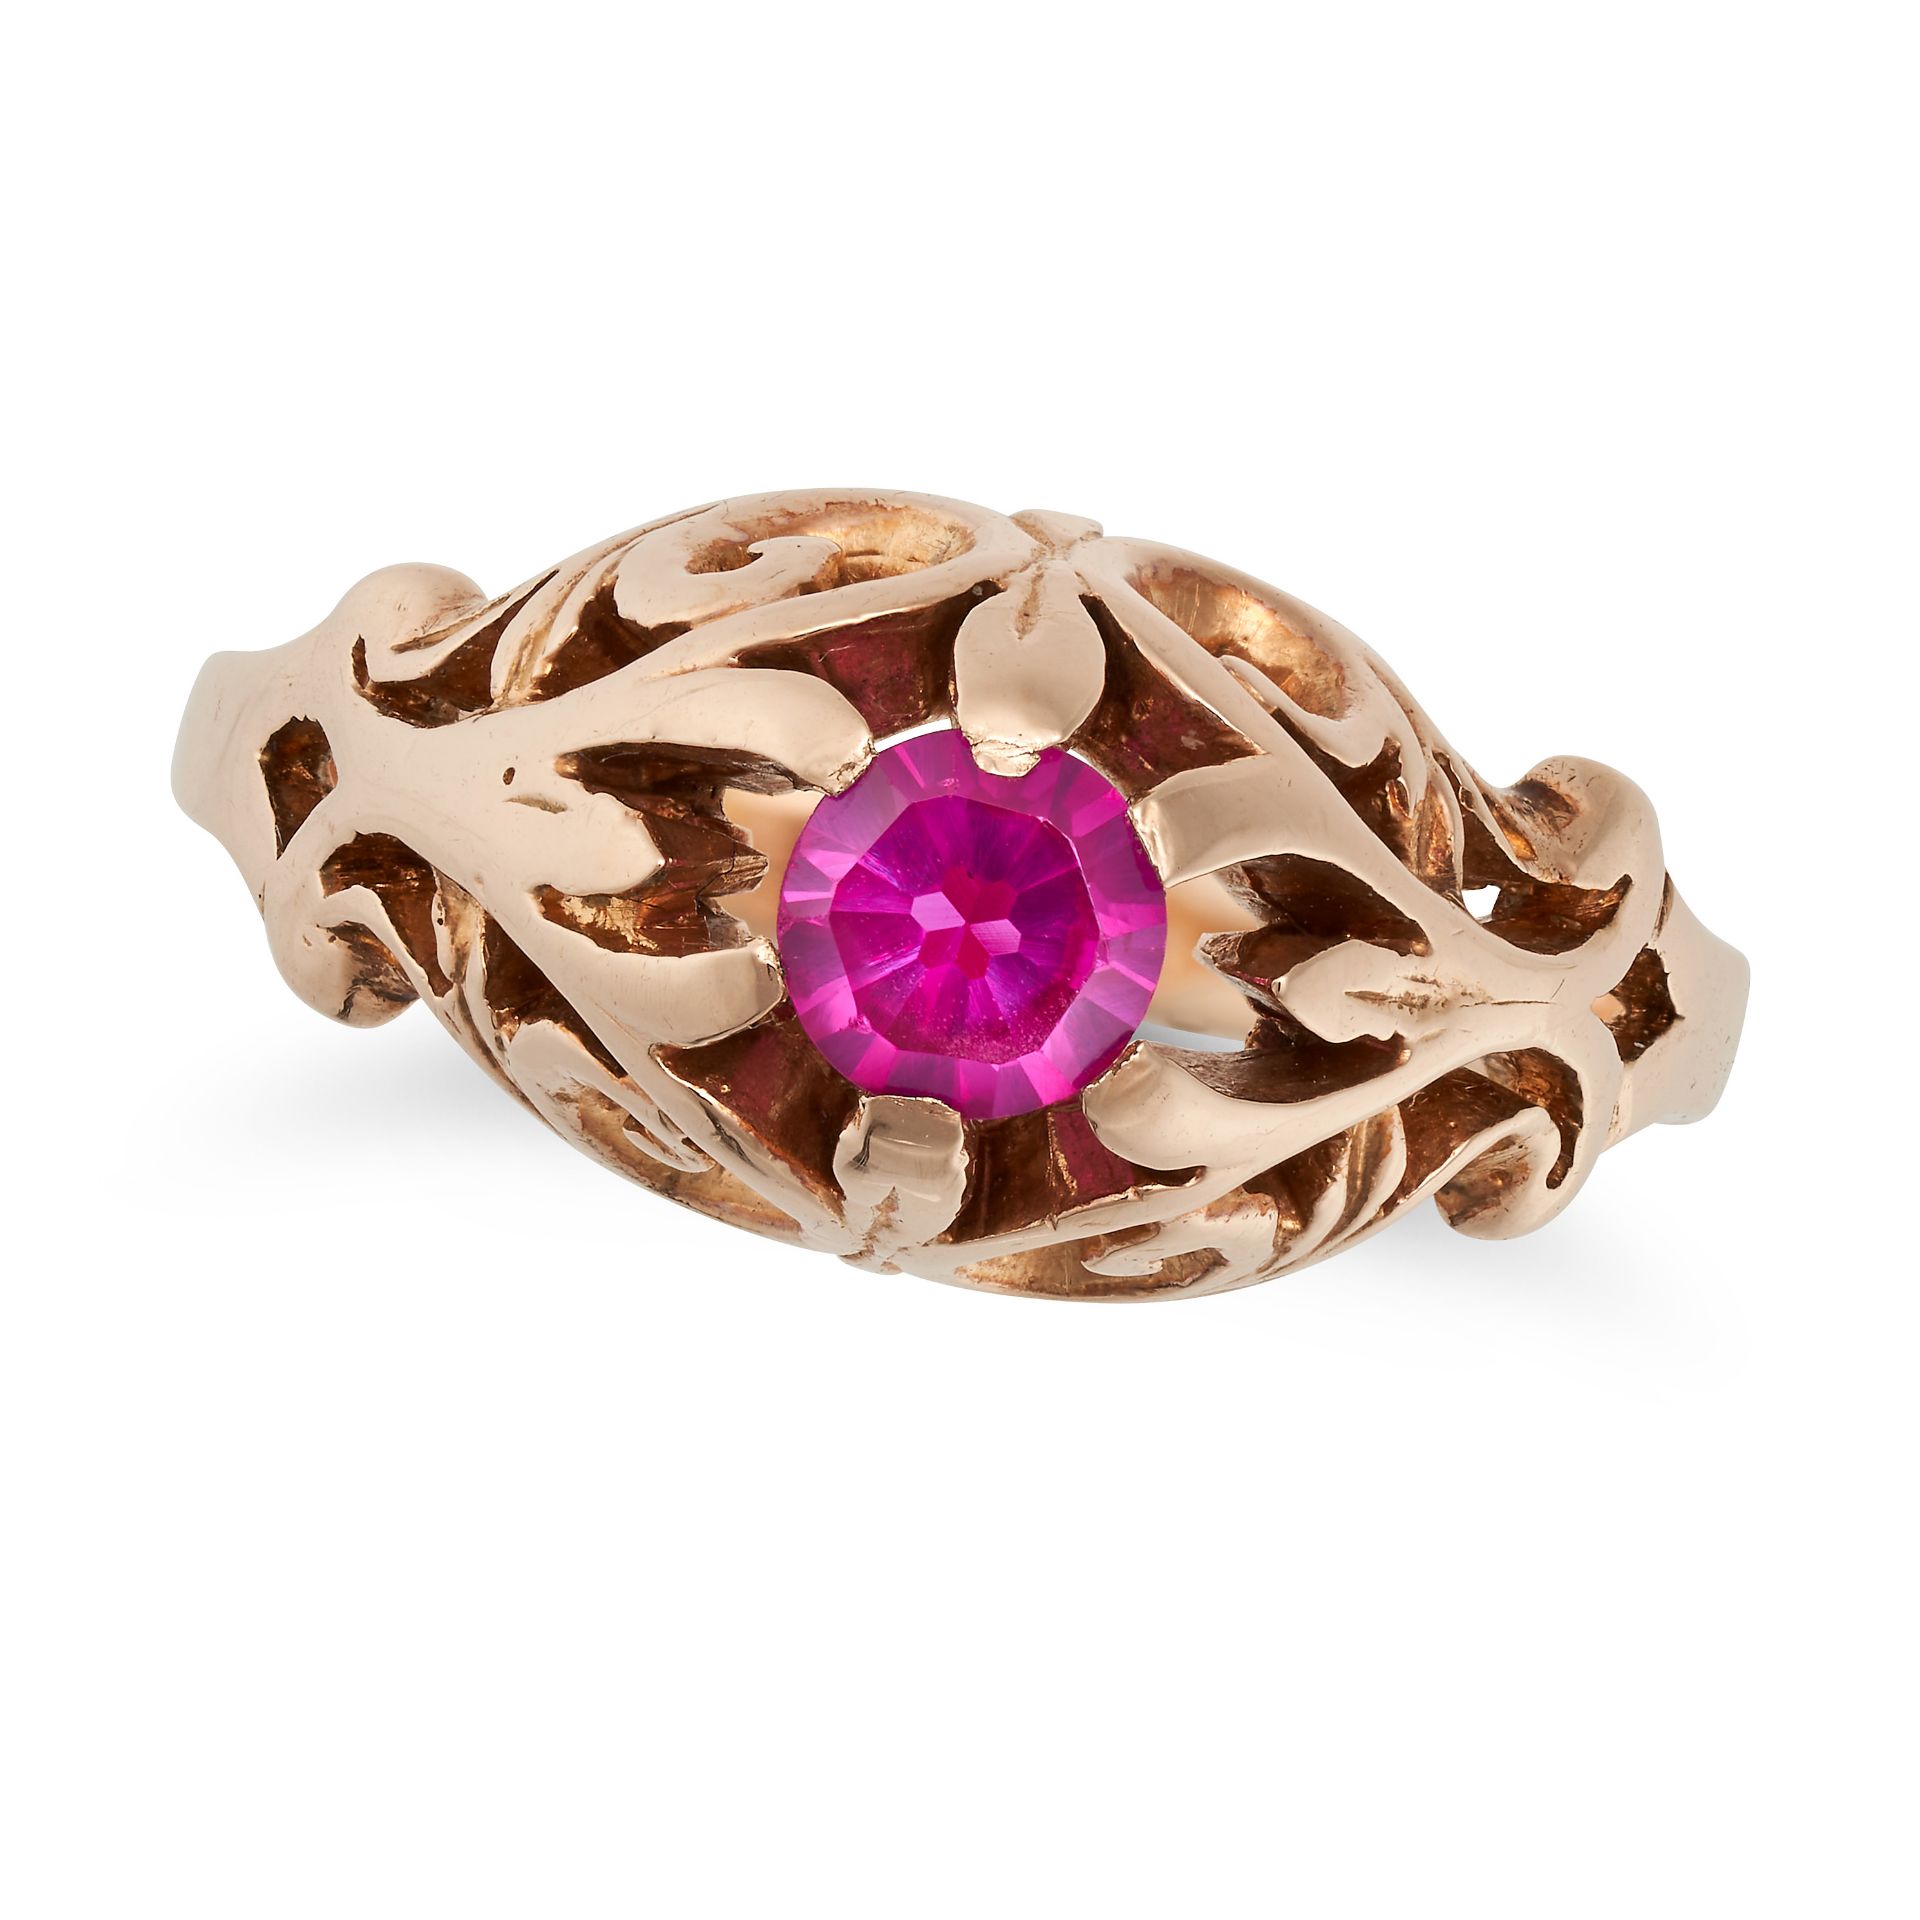 A SYNTHETIC PINK SAPPHIRE RING in yellow gold, set with a round cut synthetic pink sapphire, no a...